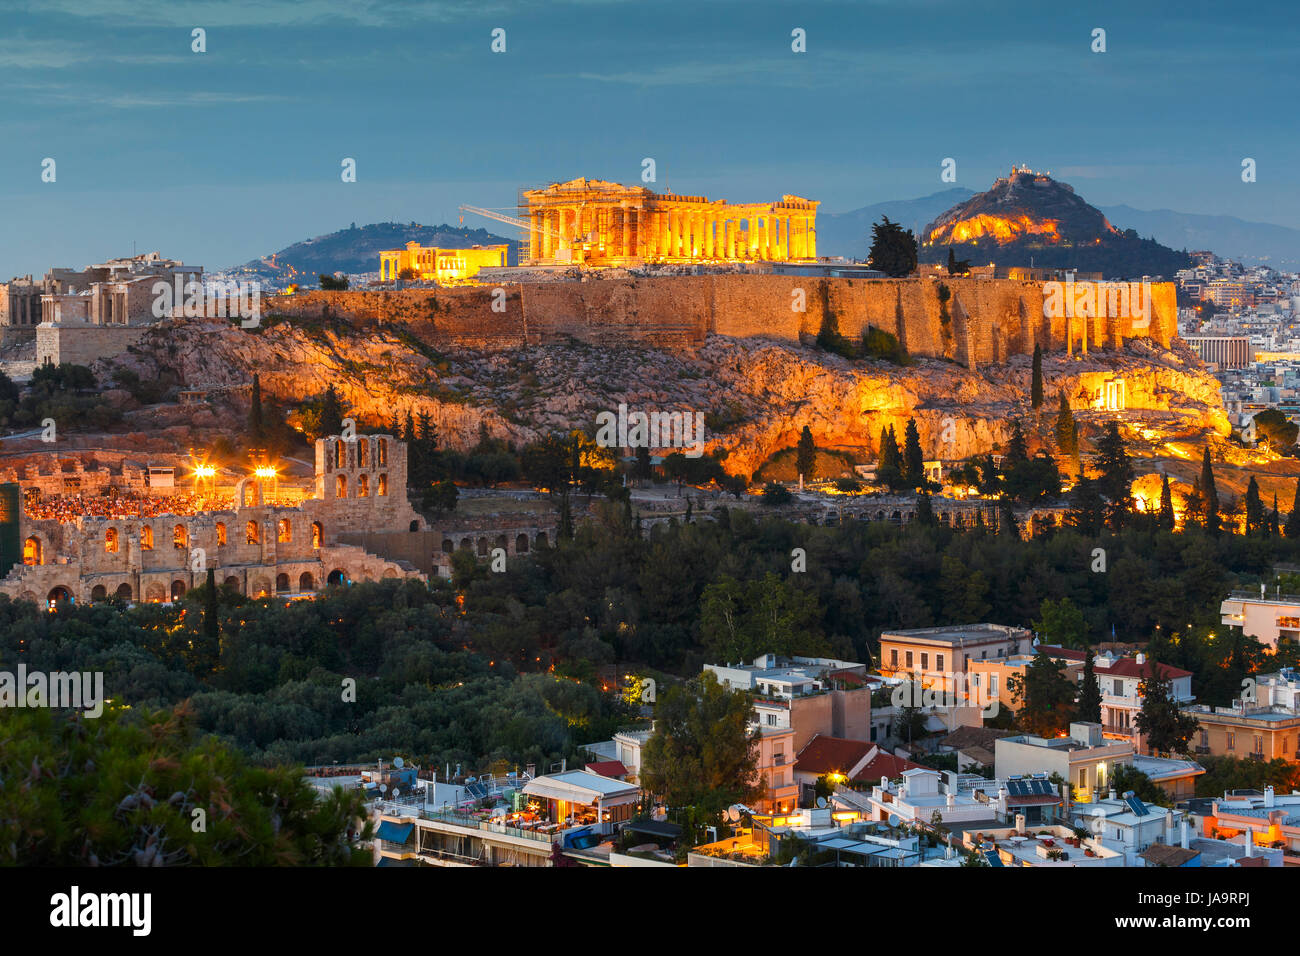 Acropolis and Parthenon temple in the city of Athens, Greece Stock Photo -  Alamy